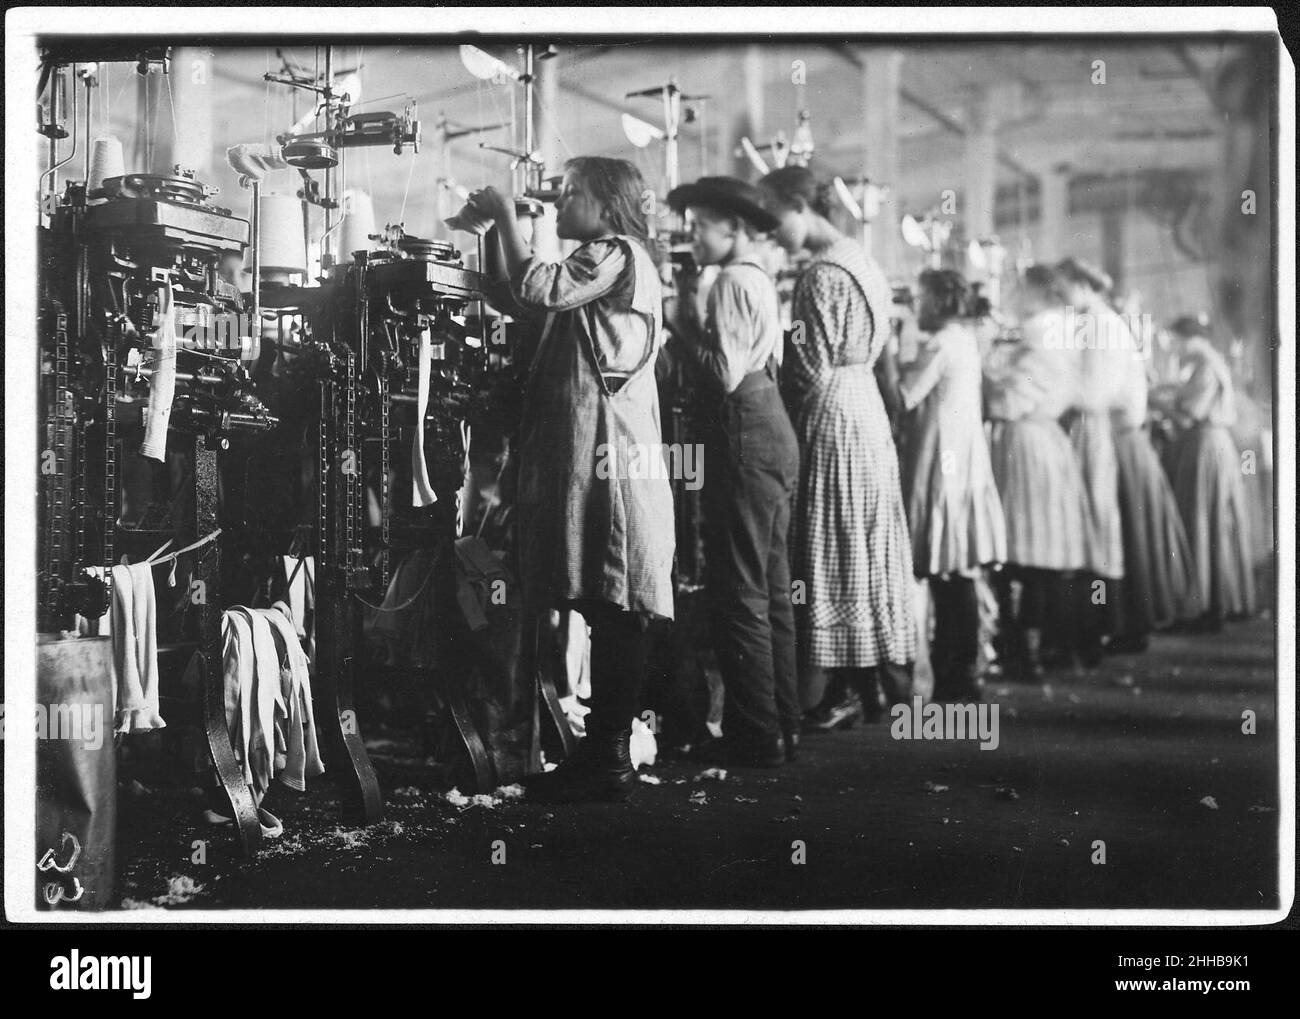 Some of the young knitters in London Hosiery Mills. Photo during work hours. London, Tenn. Stock Photo